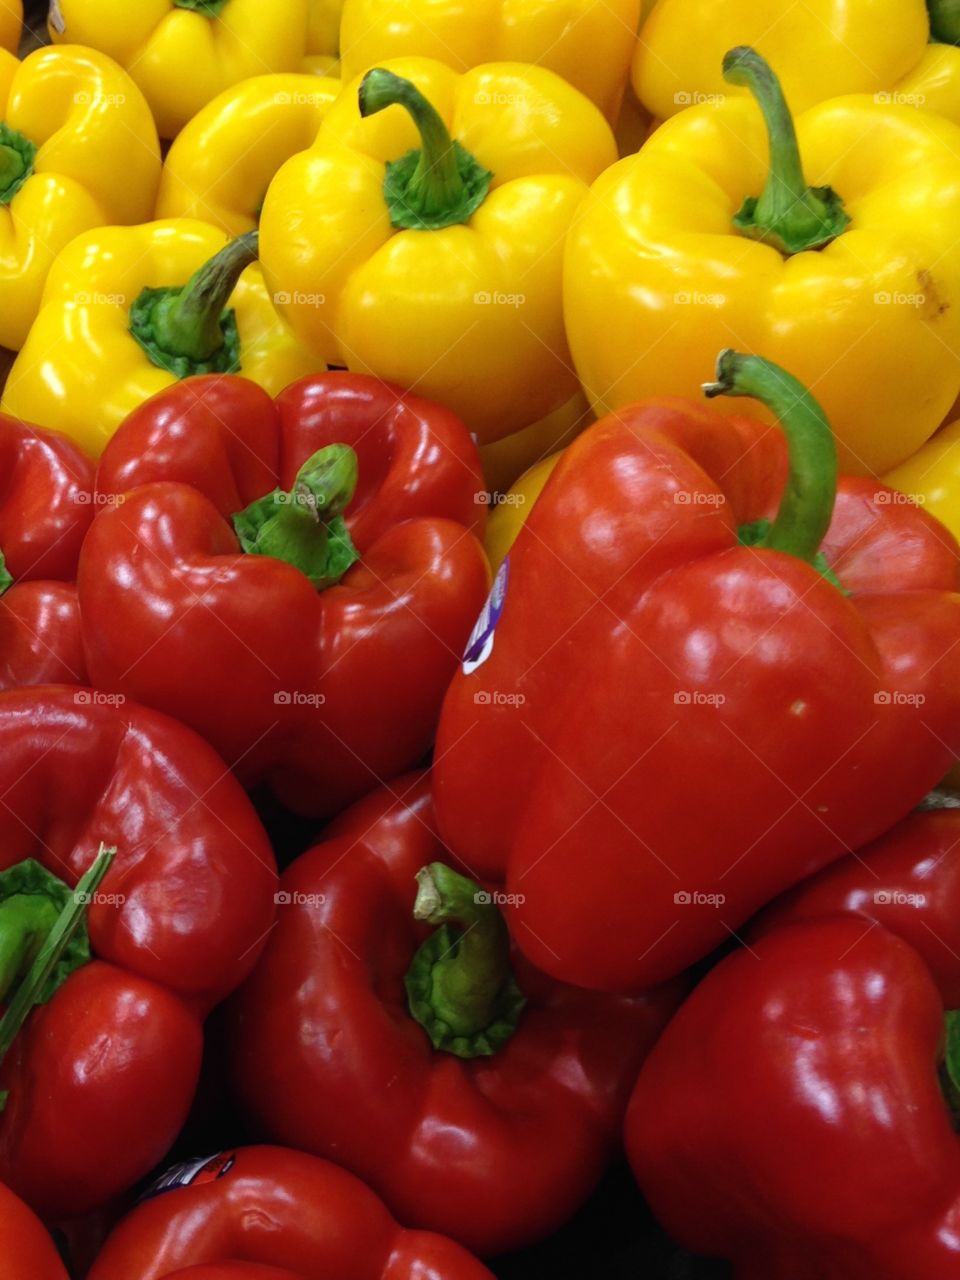 Bright red and yellow bell peppers